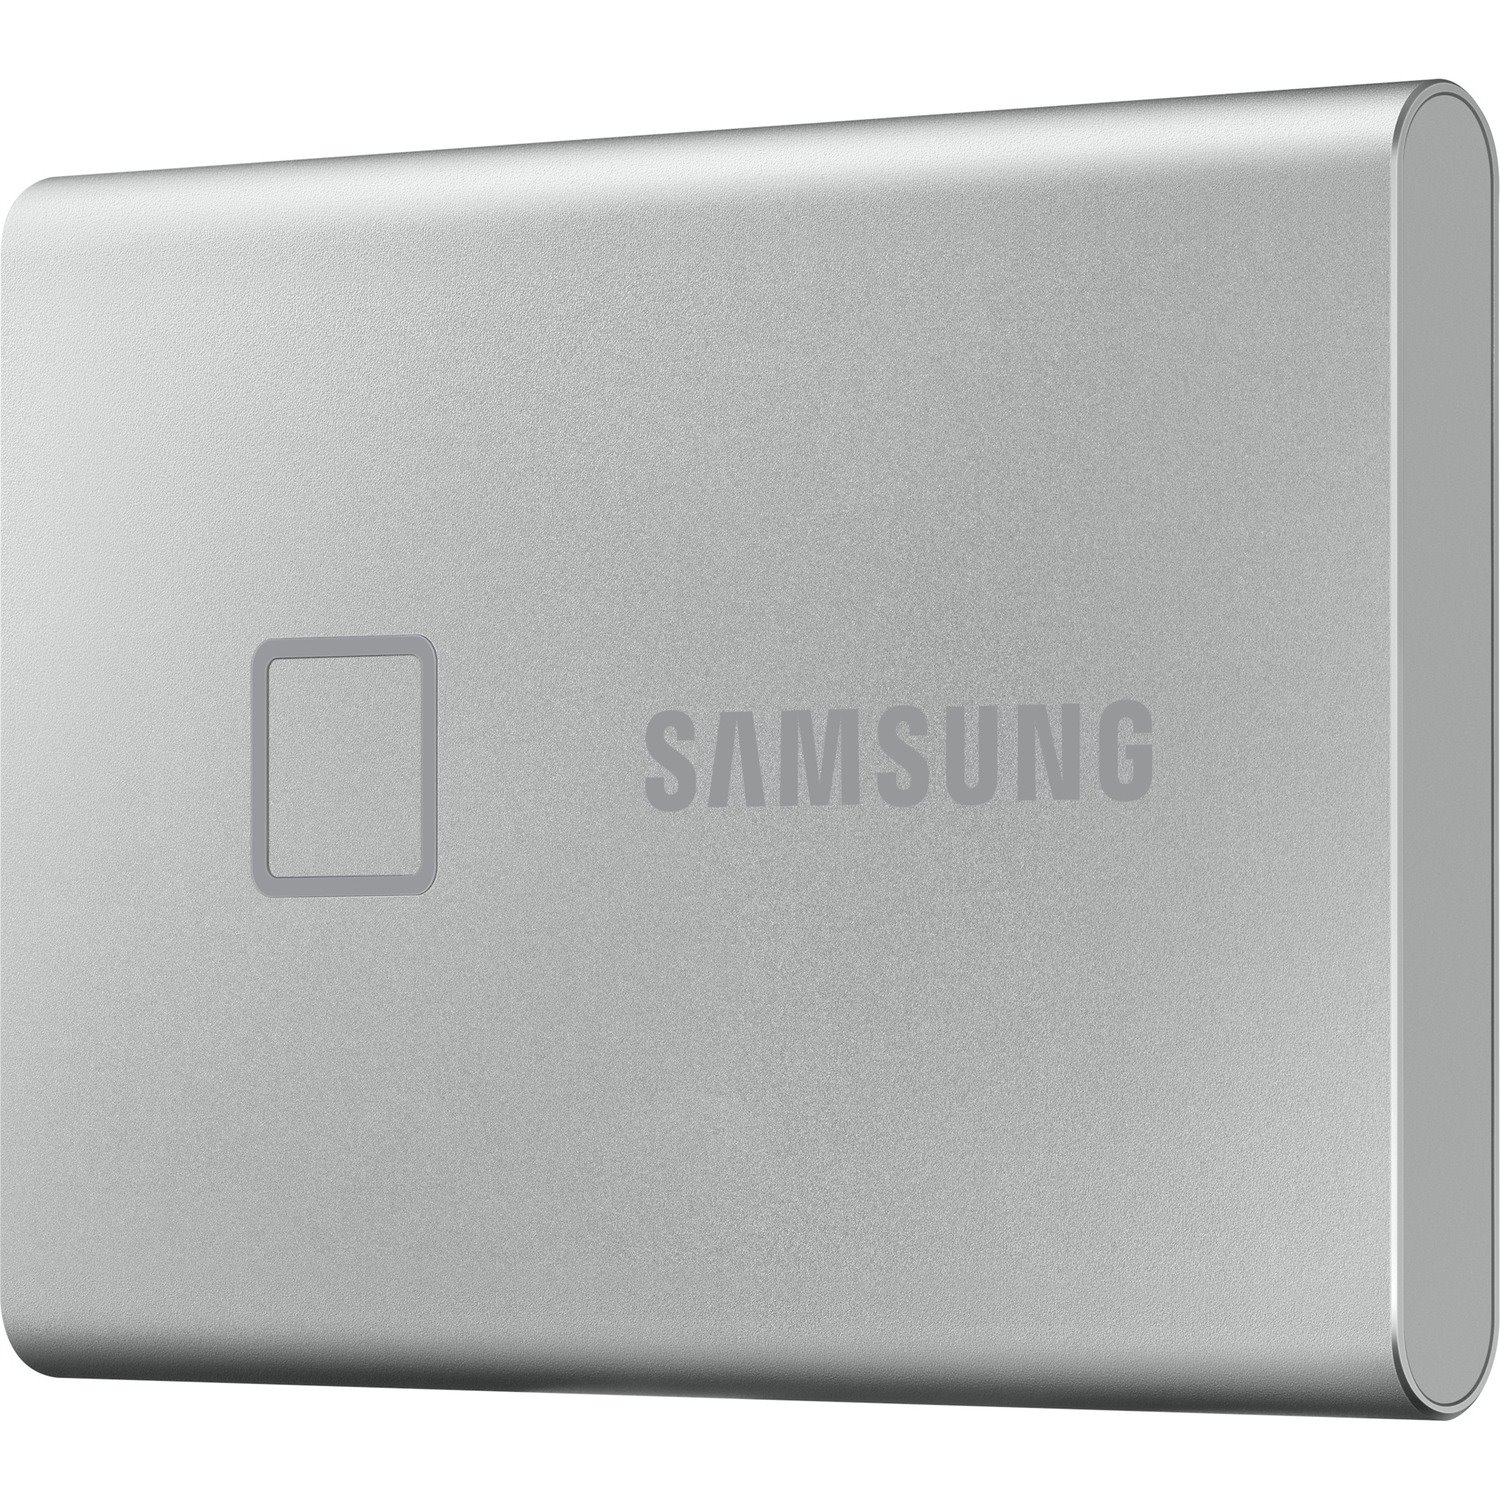 Samsung T7 MU-PC500S/WW 500 GB Portable Solid State Drive - External - PCI Express NVMe - Silver